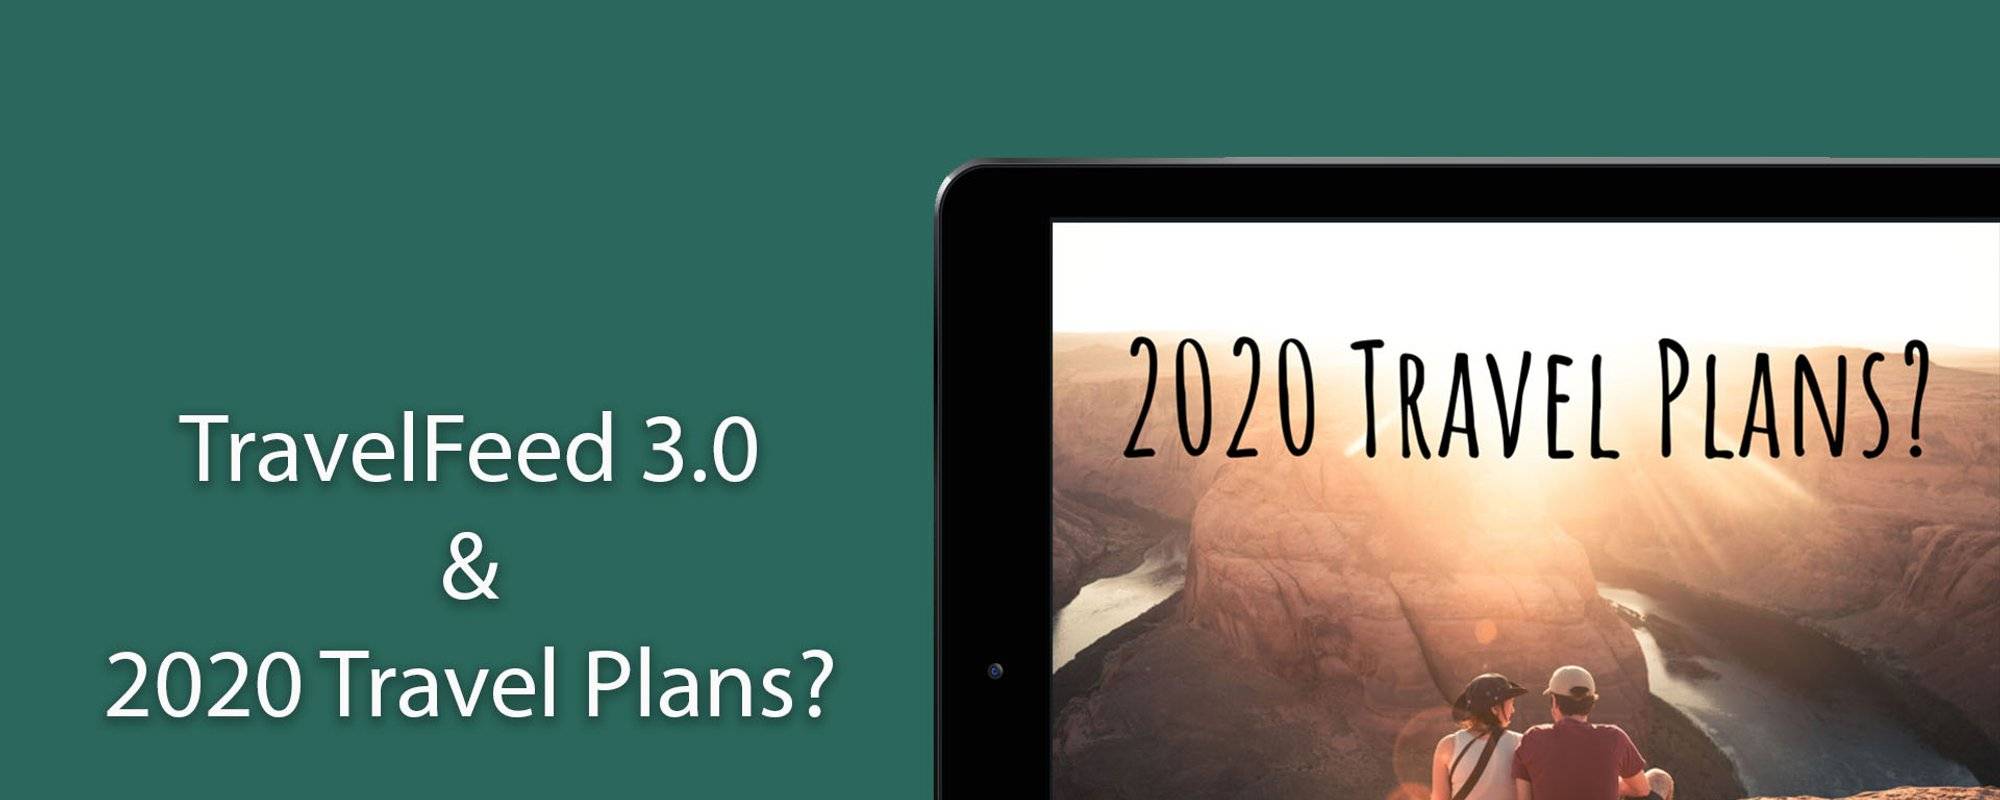 What Are Your Travel Plans For 2020?